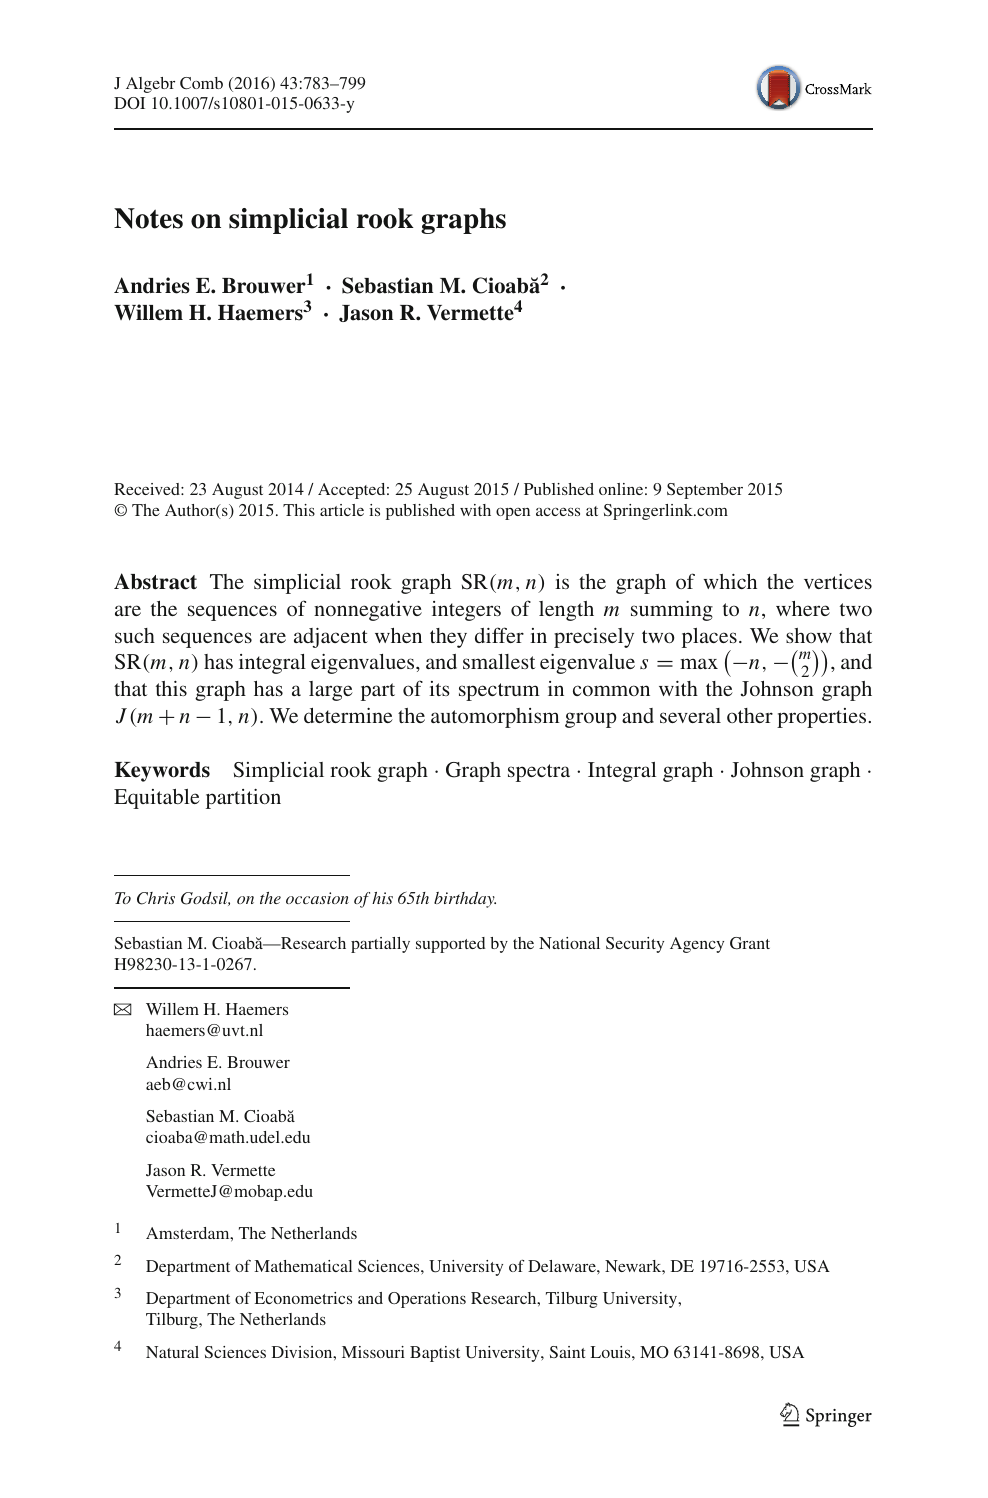 Notes On Simplicial Rook Graphs Topic Of Research Paper In Mathematics Download Scholarly Article Pdf And Read For Free On Cyberleninka Open Science Hub